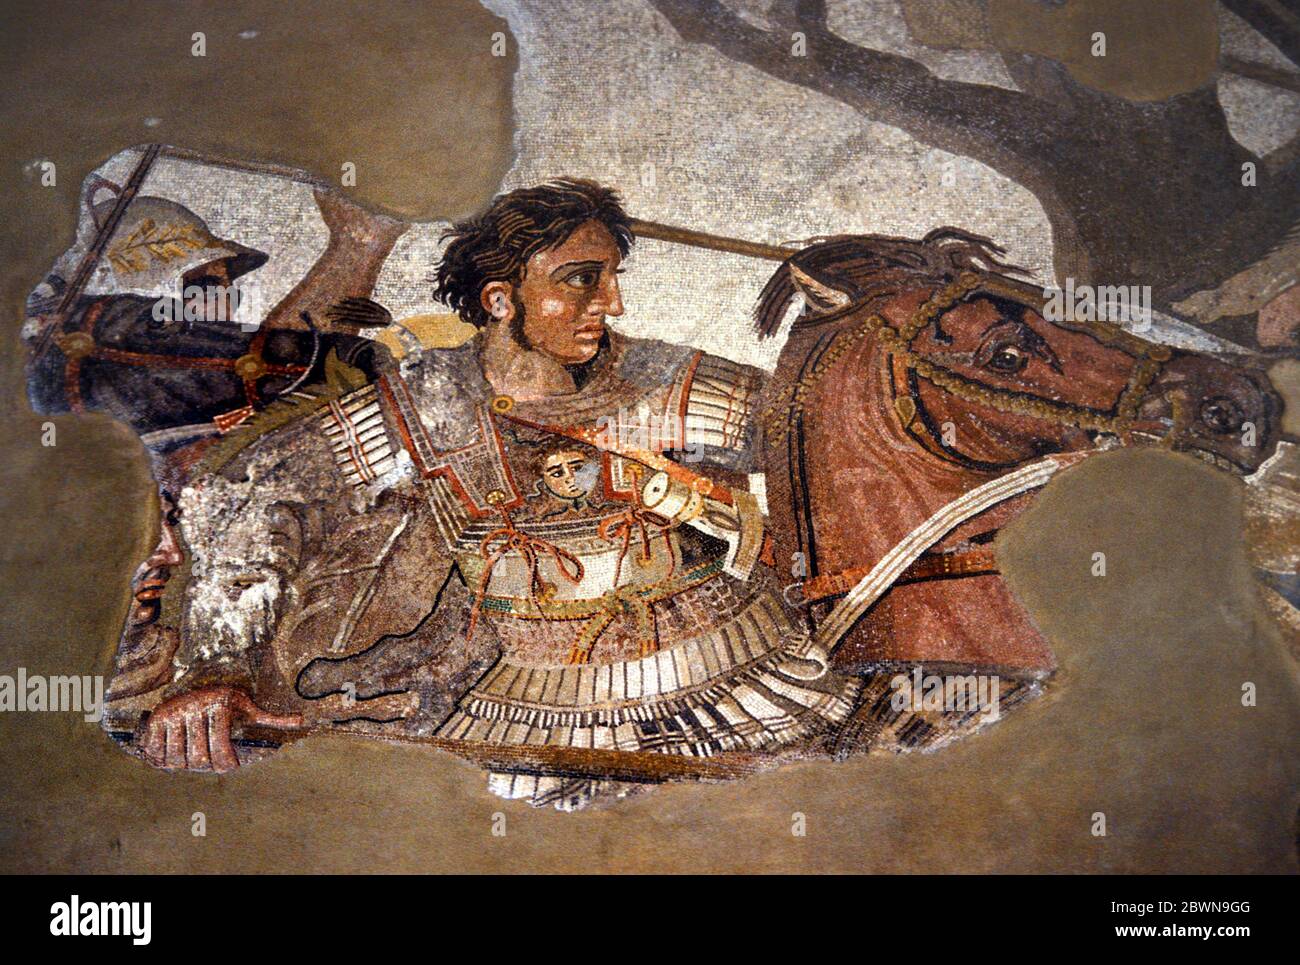 Mosaic of Alexander the Great discovered in the Casa del Fauno in Pompeii,Italy Stock Photo